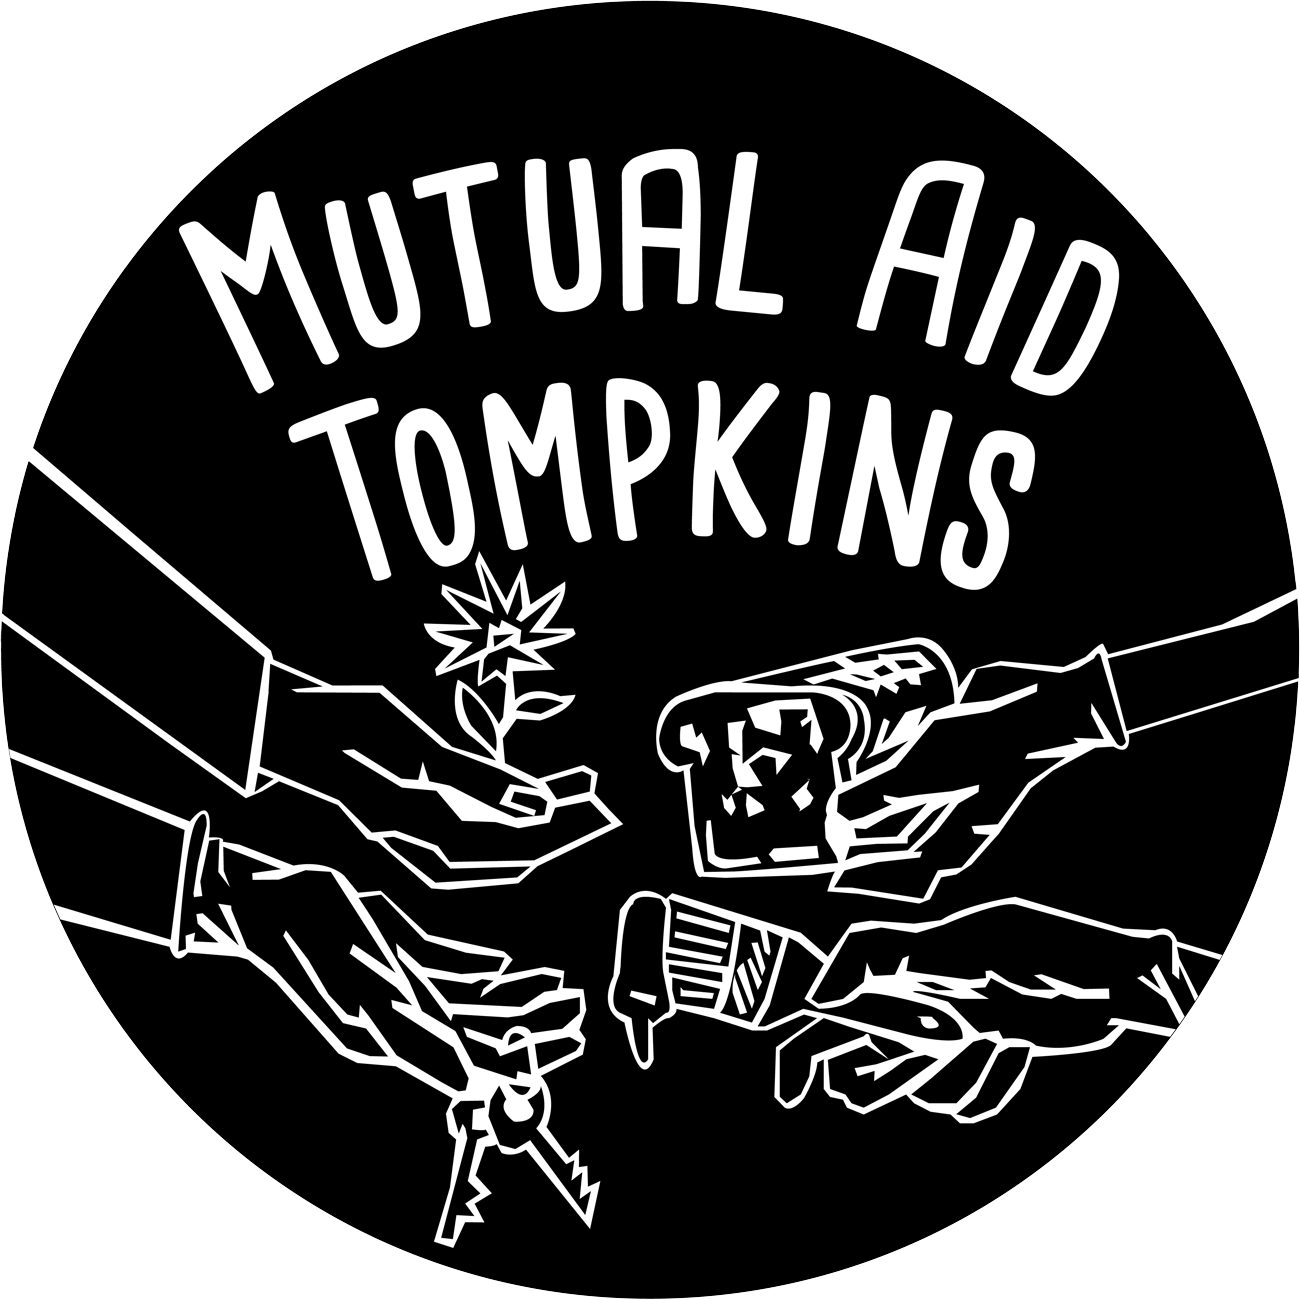 local-resources-mutual-aid-tompkins